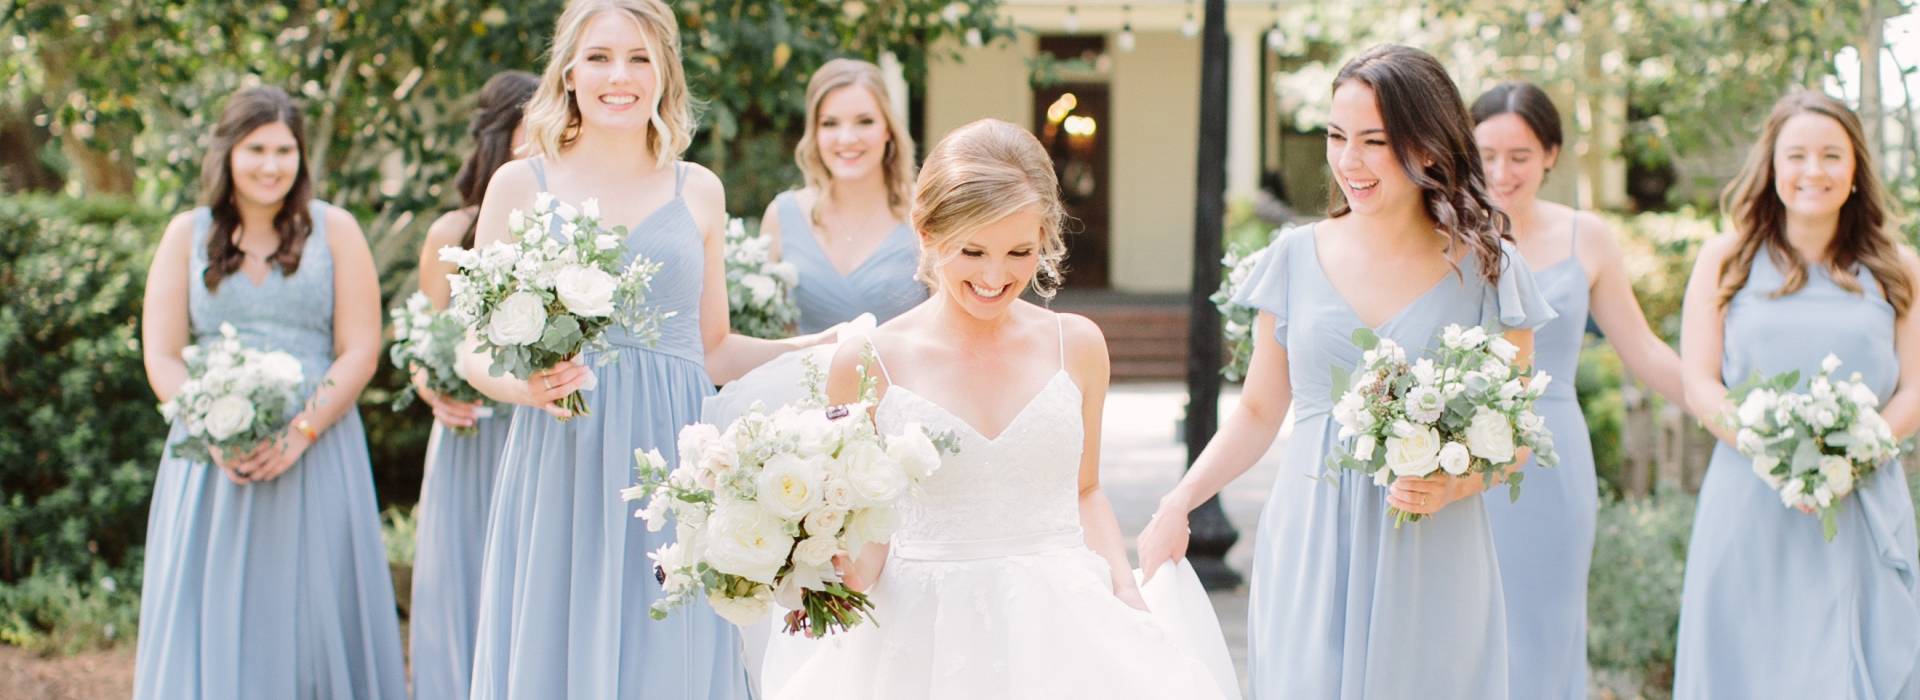 bridesmaids in blue dresses + tips on marketing to local brides